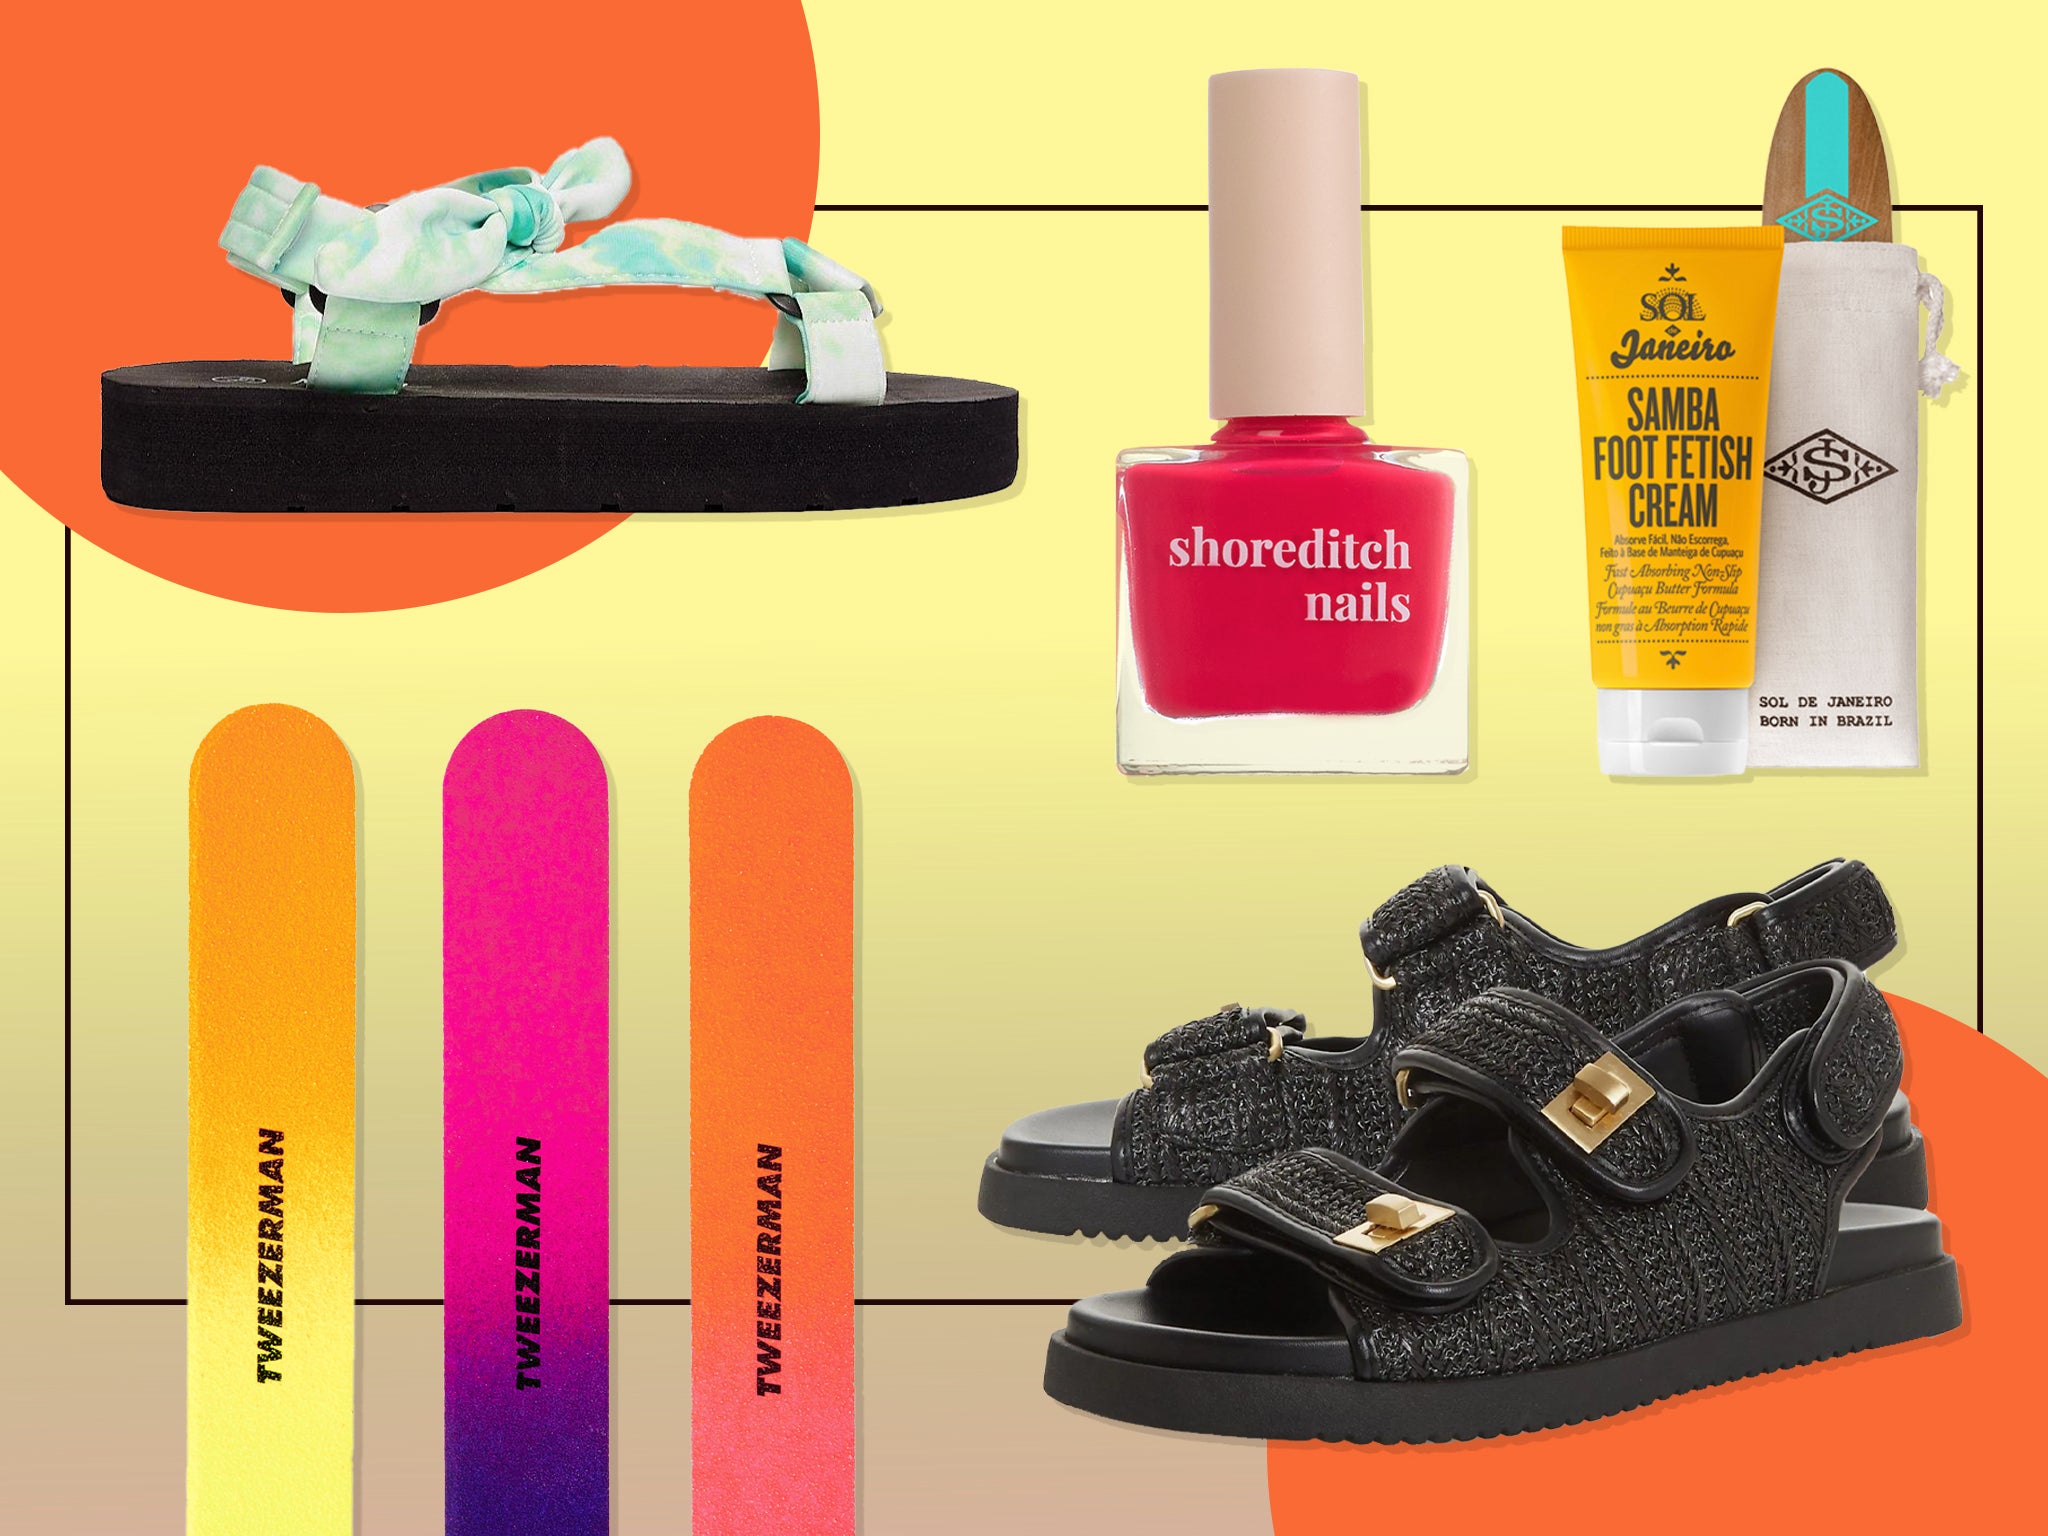 Get ready to revive your long-neglected feet just in time for the sunshine